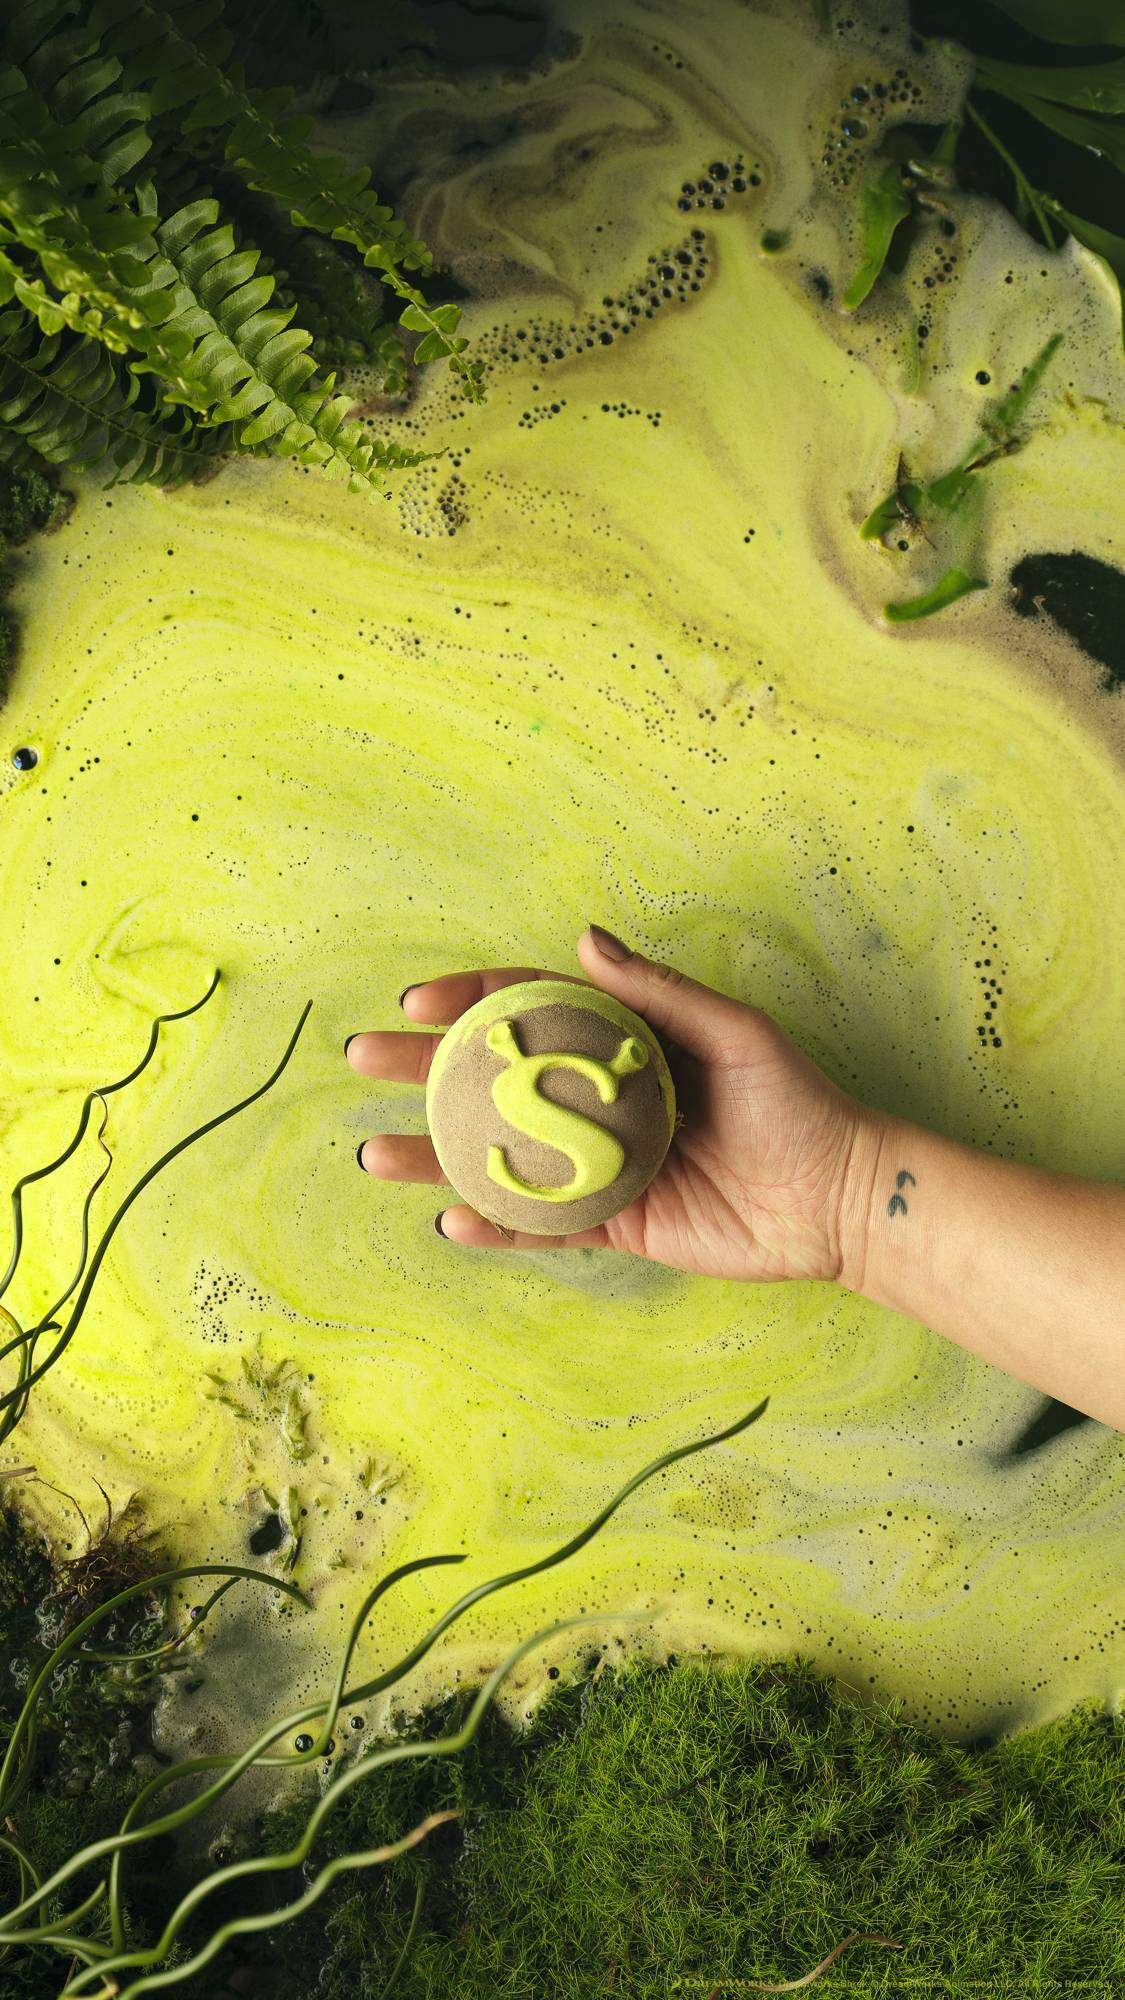 The image shows the model's forearm and hand as they hold the Shrek Swamp bath bomb just above the neon-green, swirling, foamy water below. Moss and leaf foliage surround the border. 